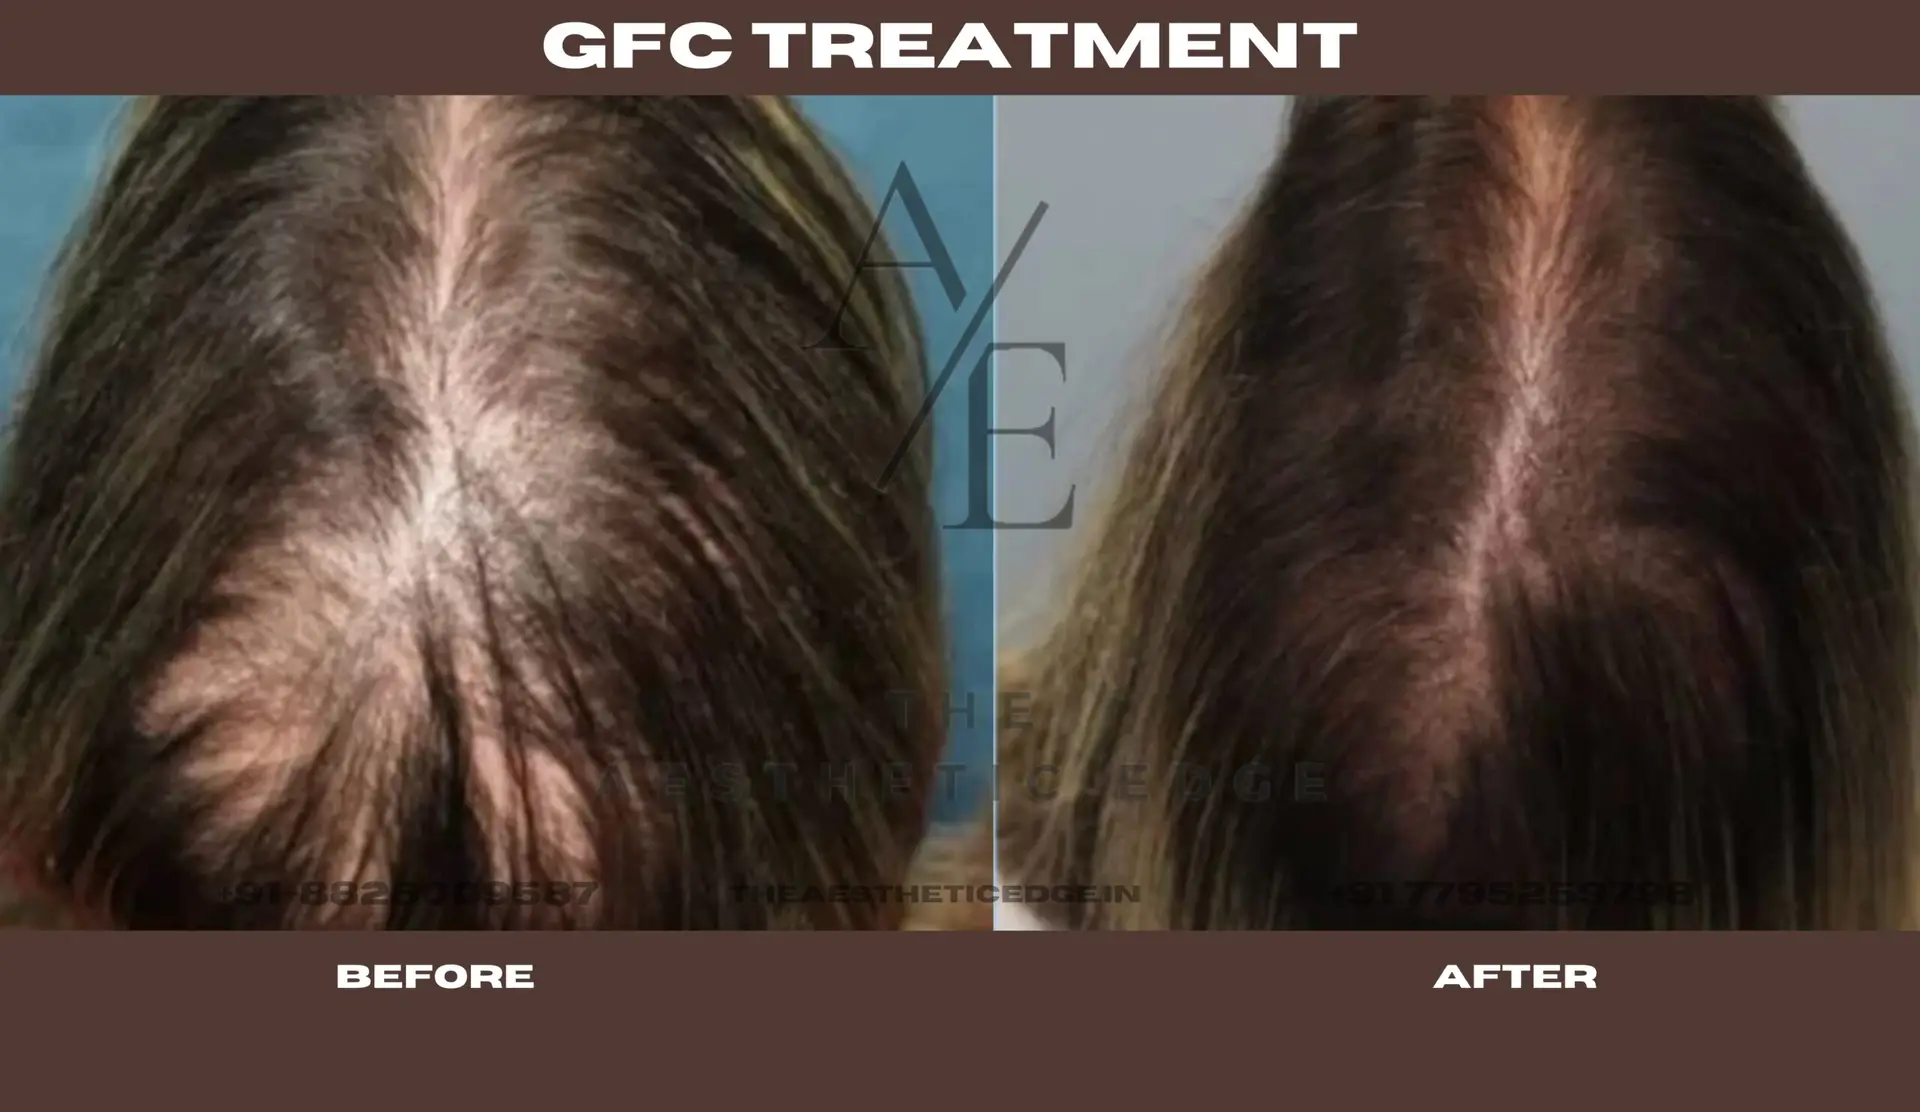 GFC treatment results